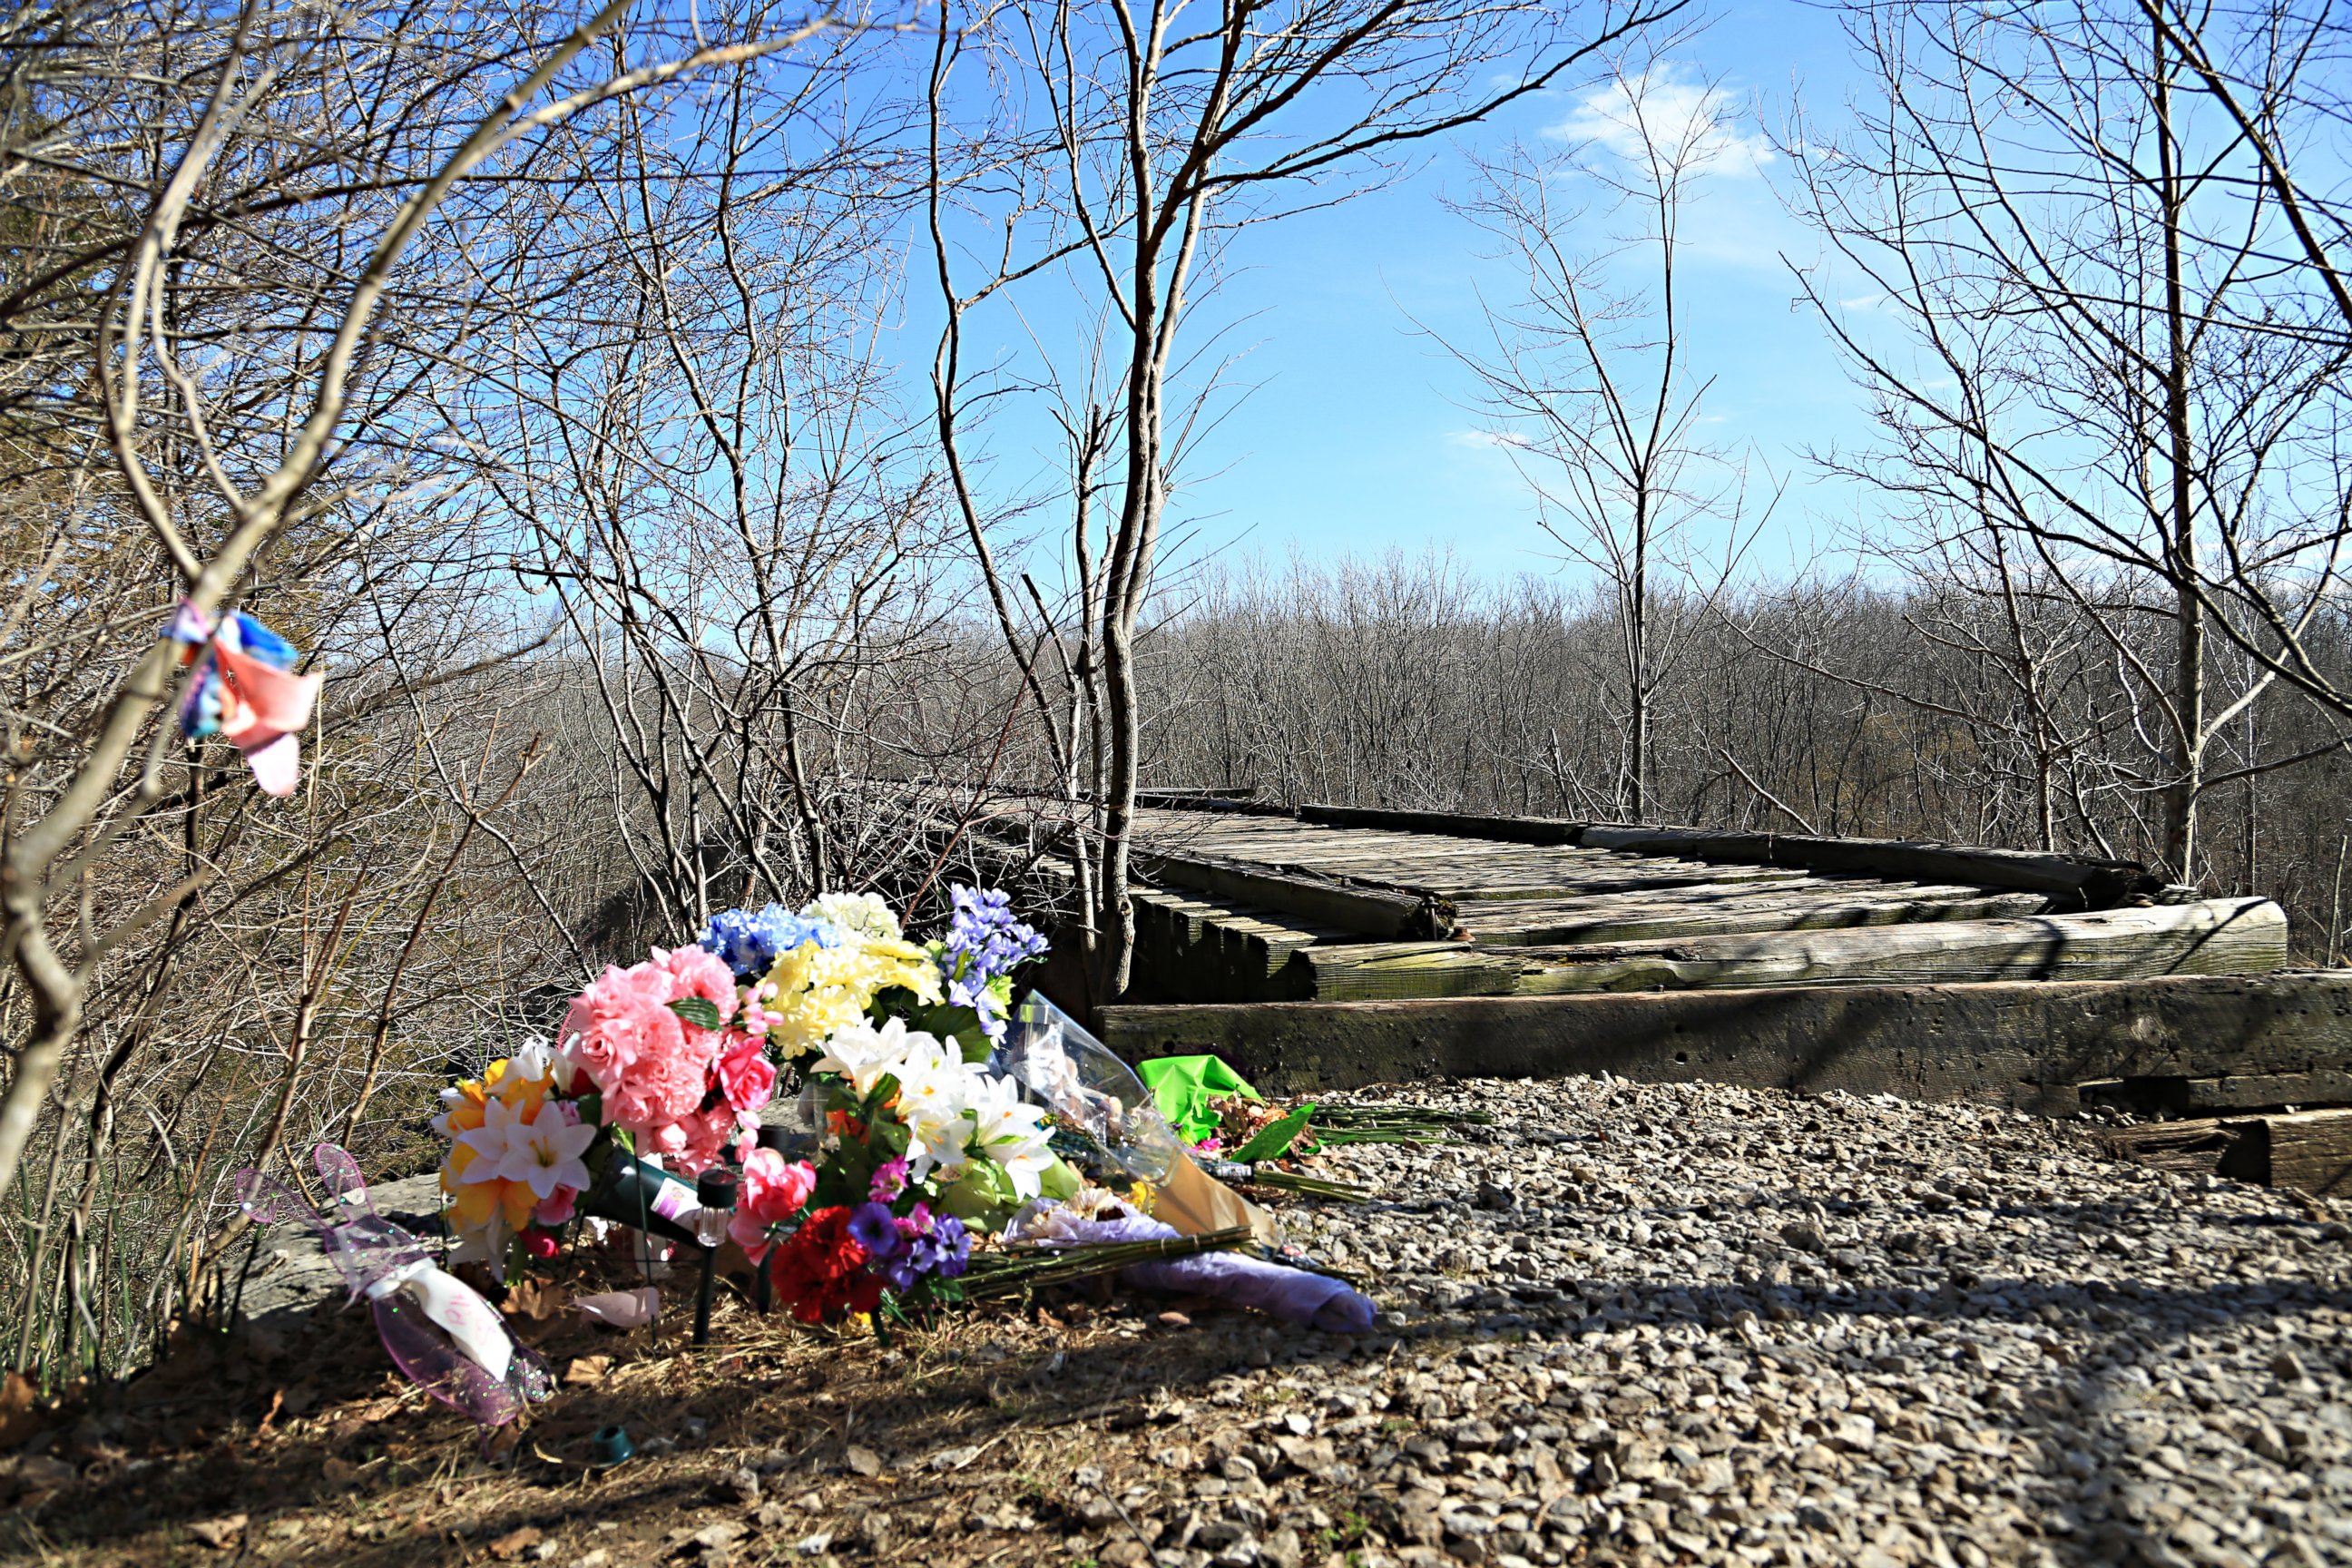 PHOTO: A makeshift memorial for Abby Williams and Libby German next to a trail they were hiking the day they disappeared, Feb. 13, 2017, in Delphi, Indiana.